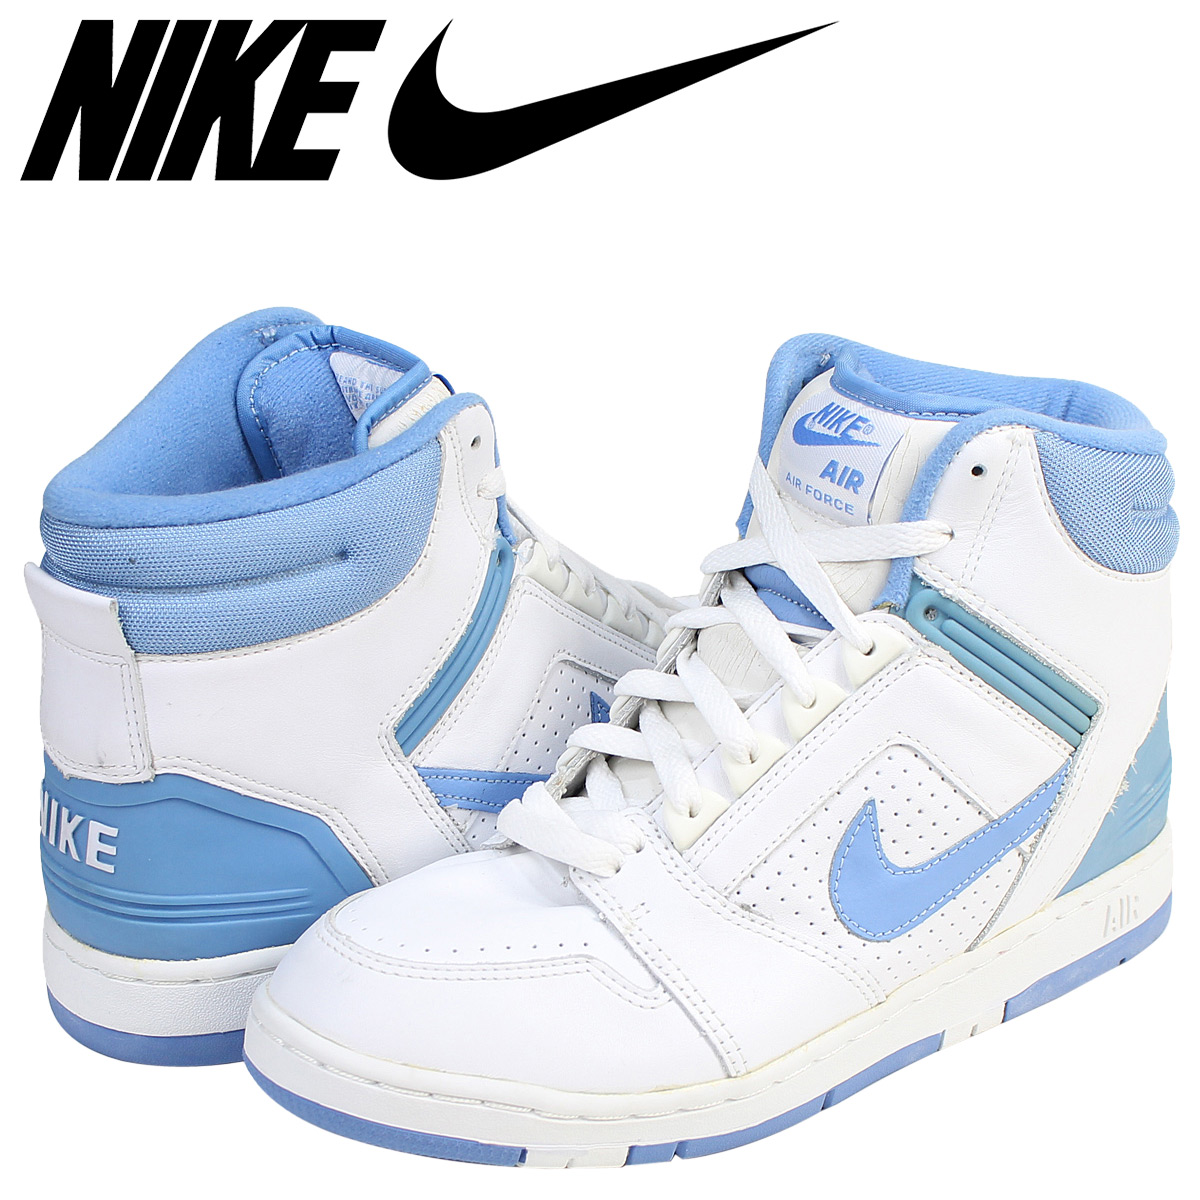 nike shoes air force 2 cheap online